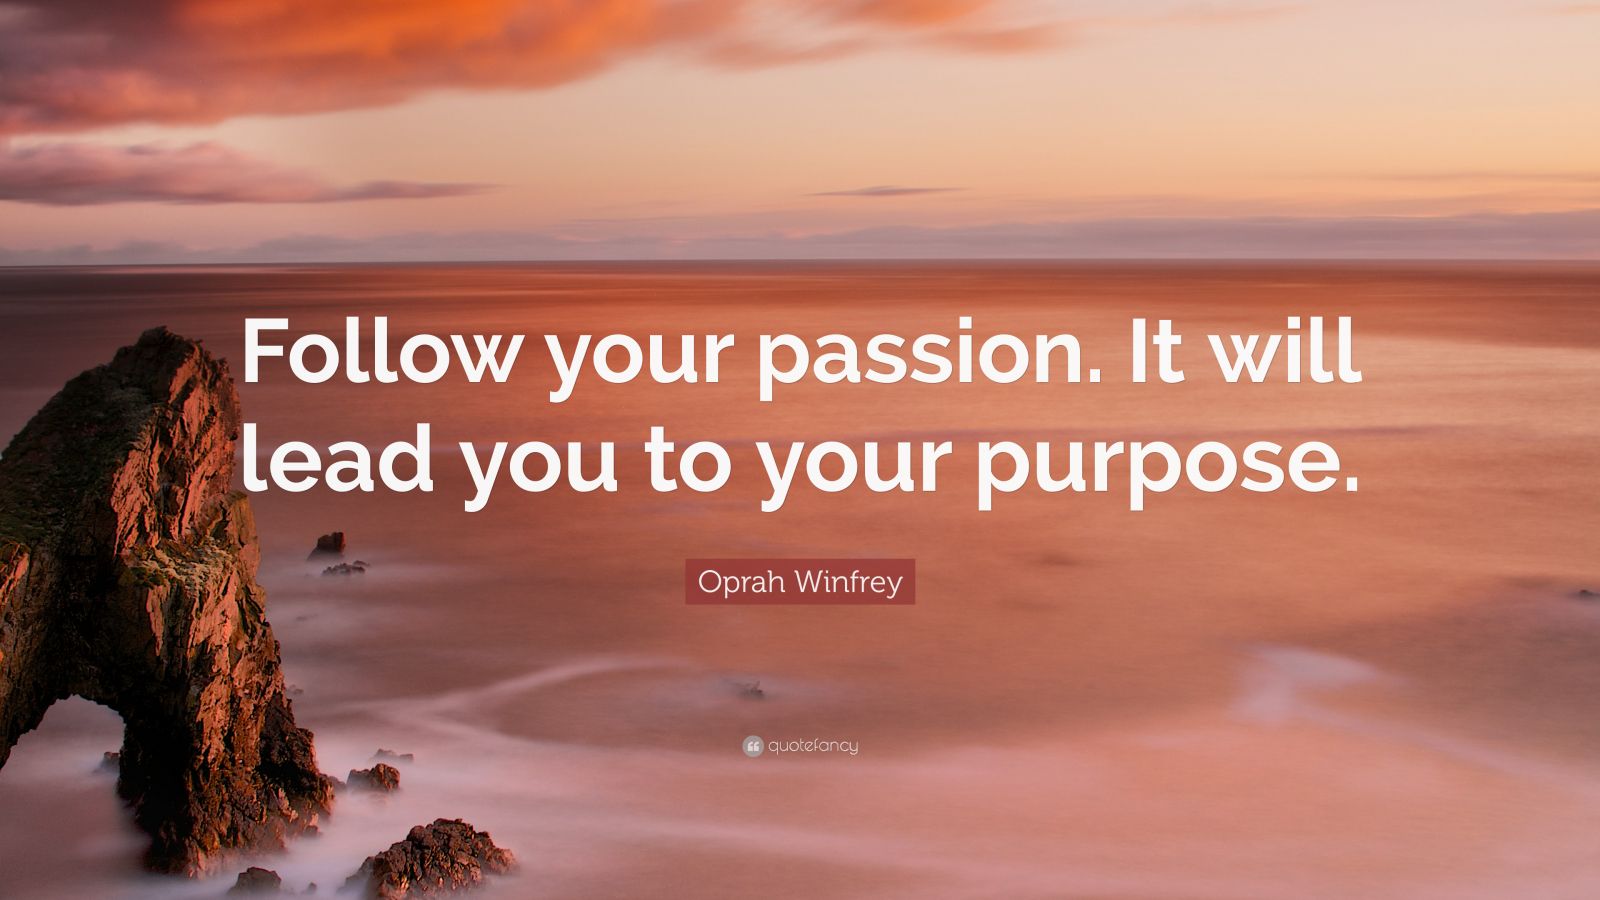 Oprah Winfrey Quote: "Follow your passion. It will lead you to your purpose." (12 wallpapers ...